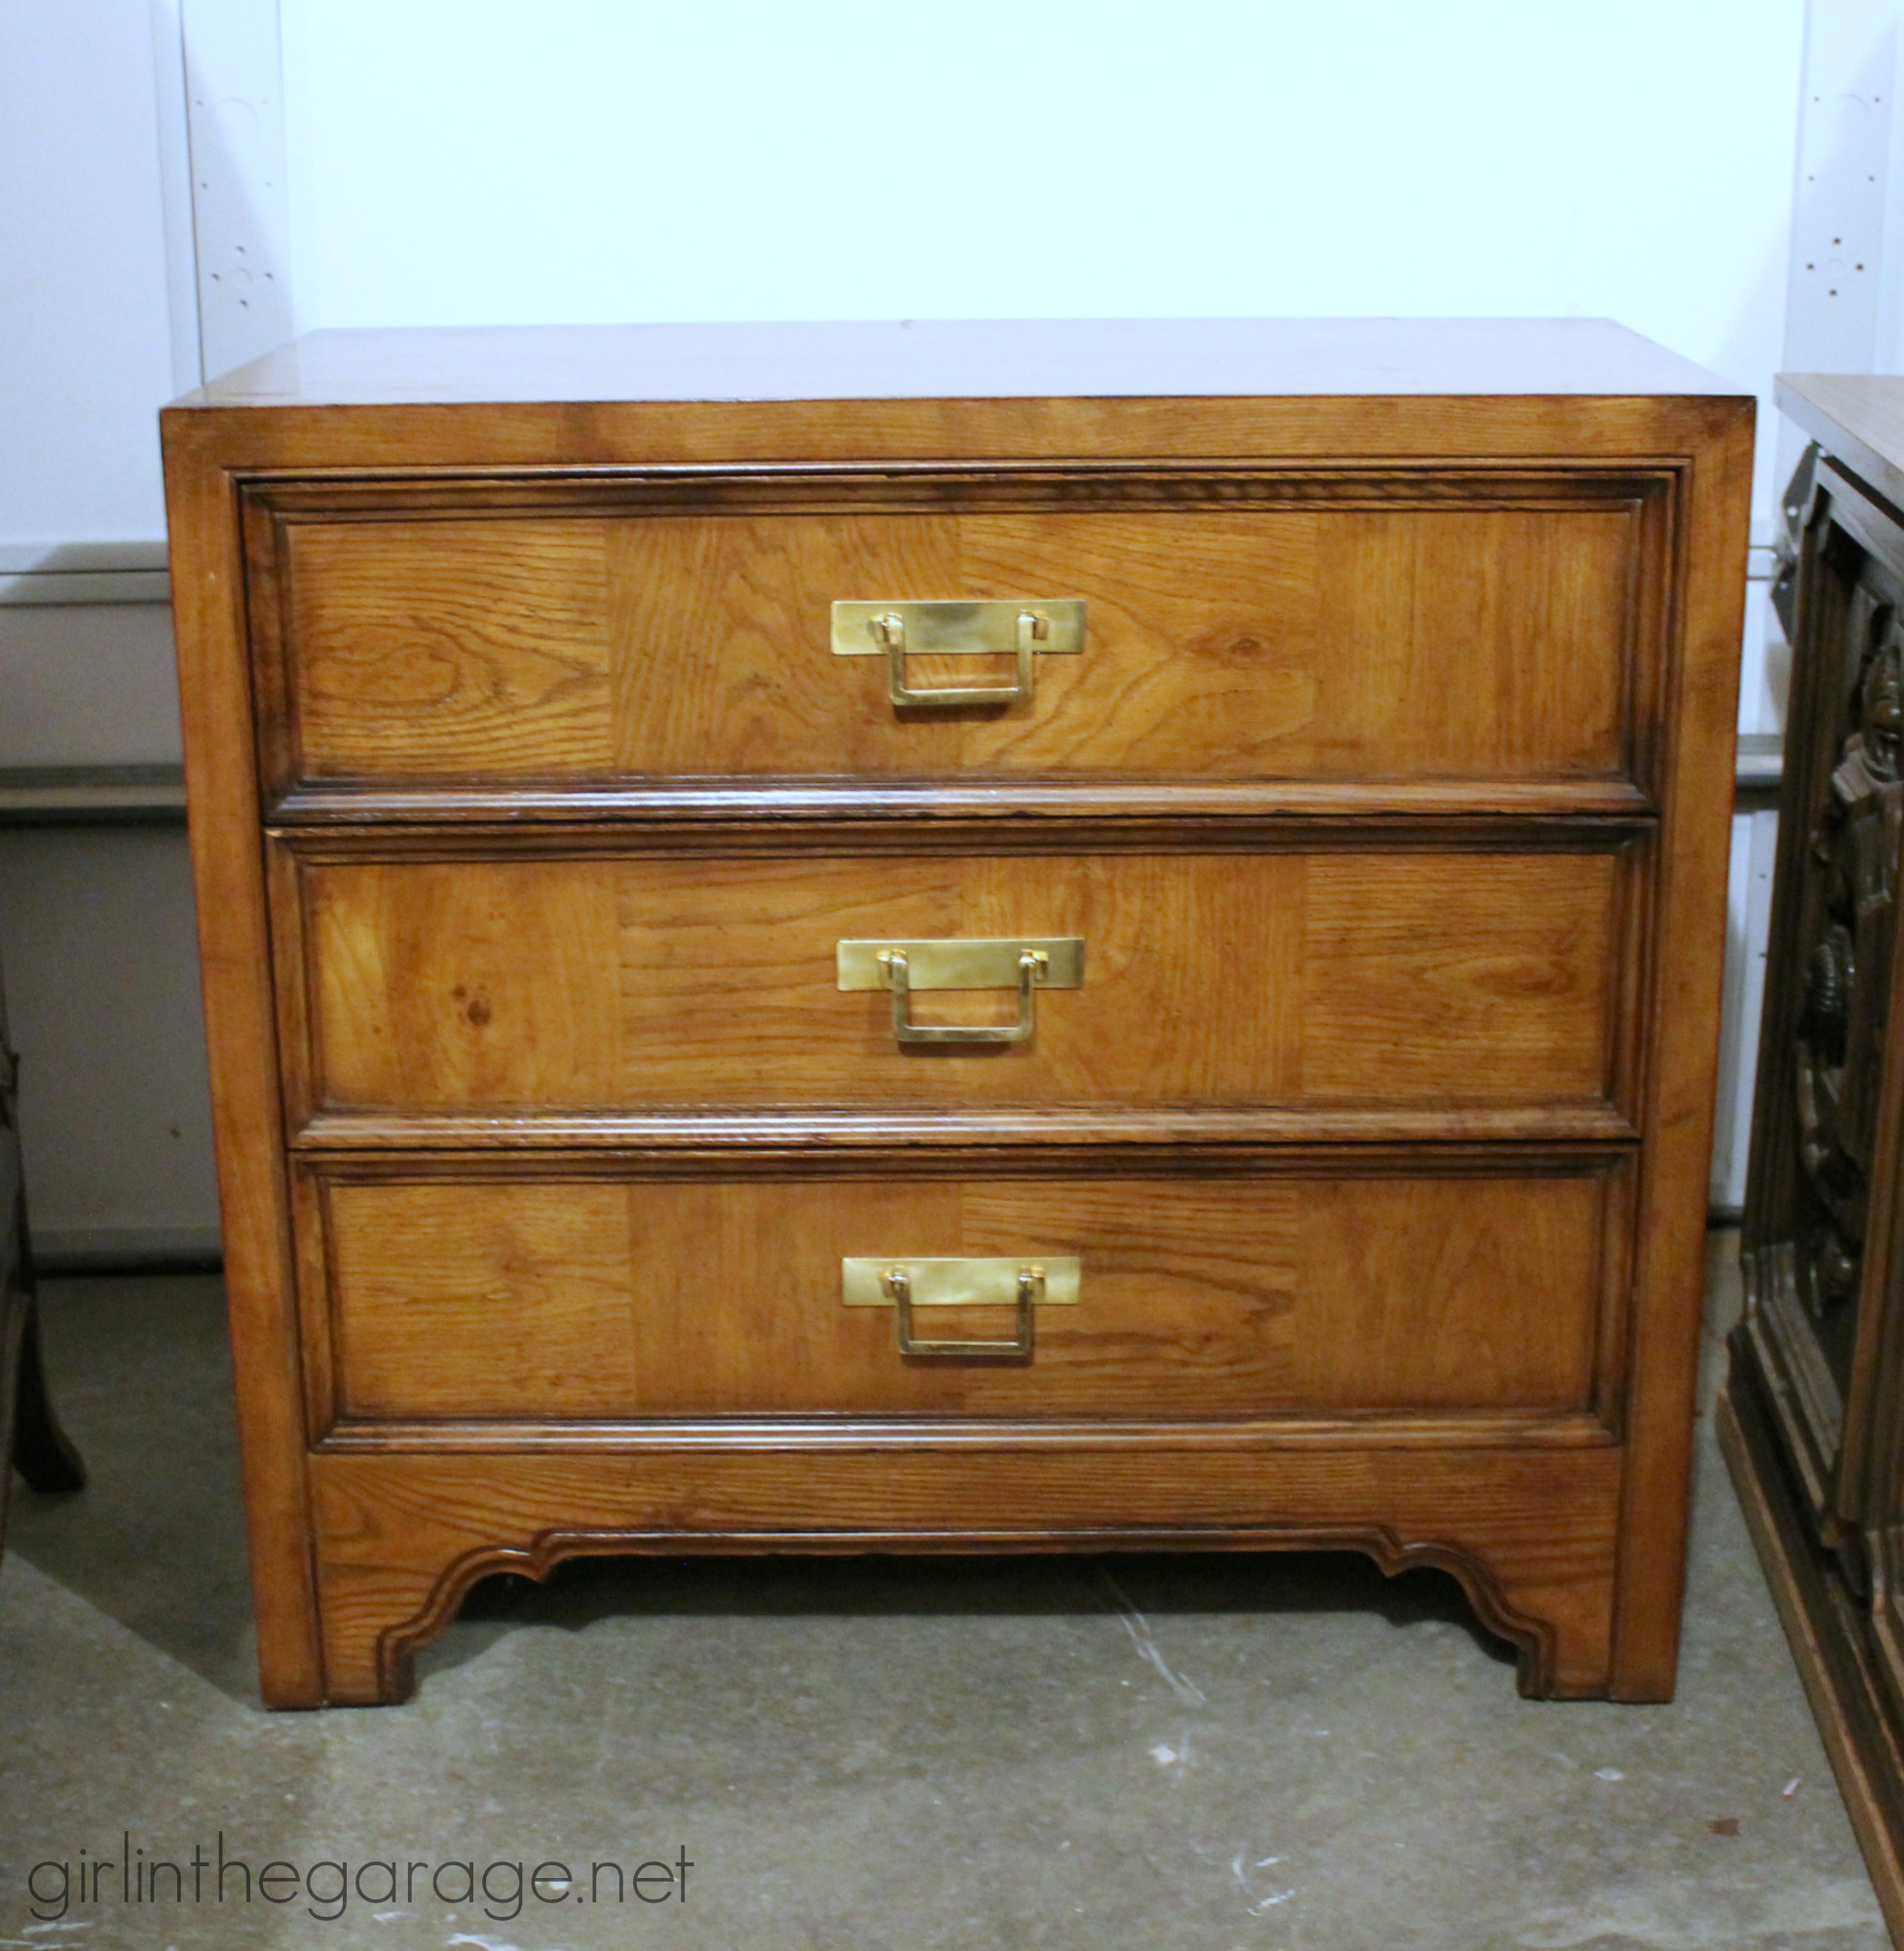 Henredon dresser makeover in Old White Chalk Paint by Annie Sloan - Girl in the Garage